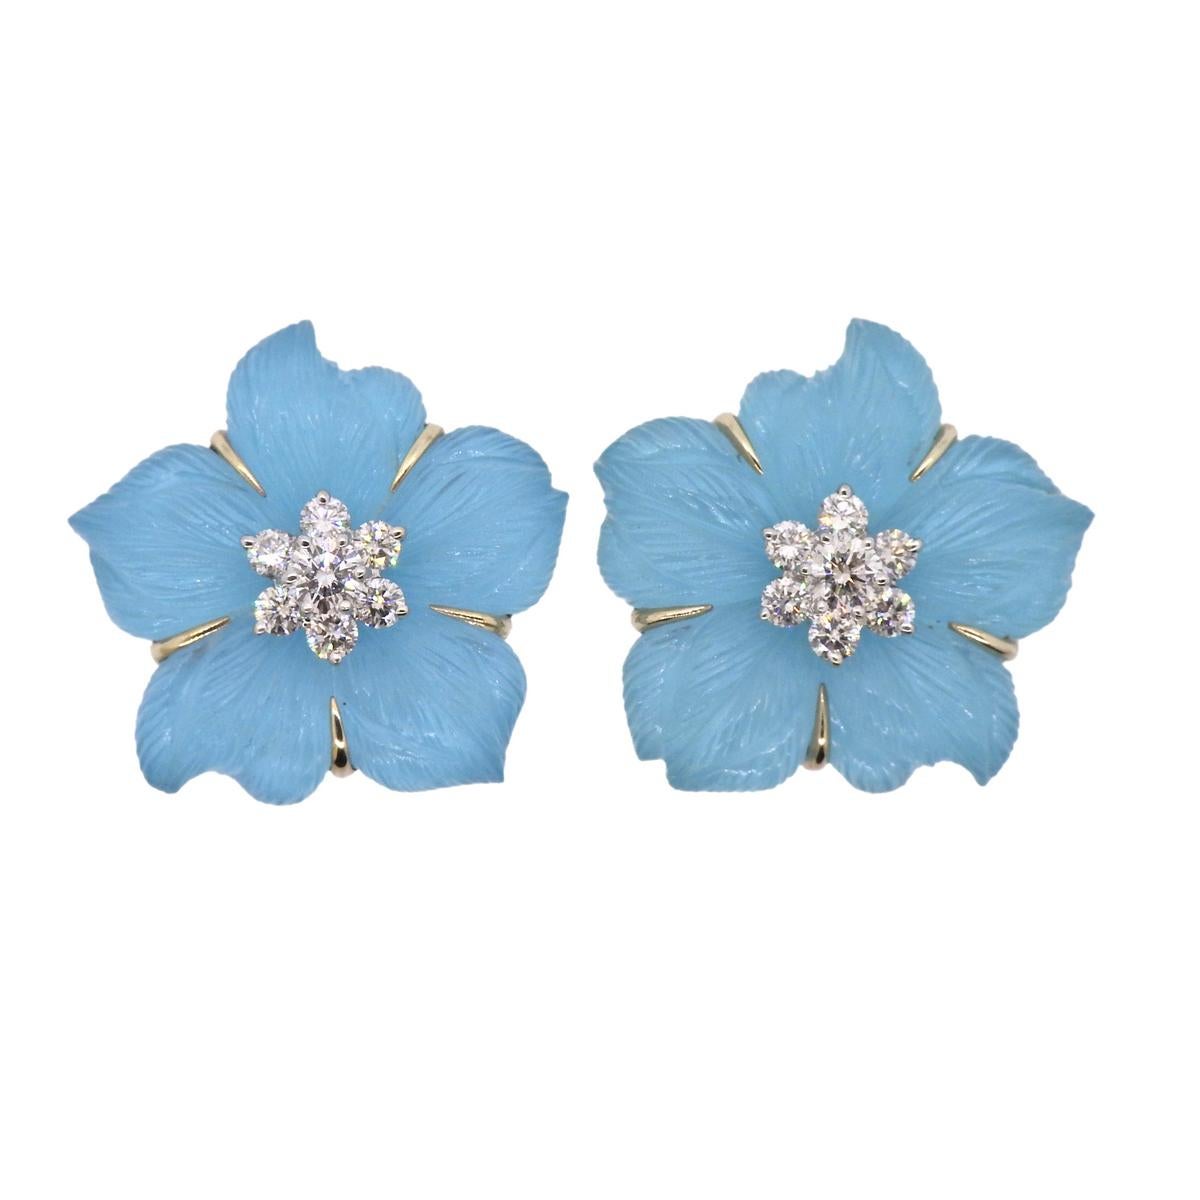 Seaman Schepps Clematis Crystal Turquoise Diamond Gold Flower Earrings